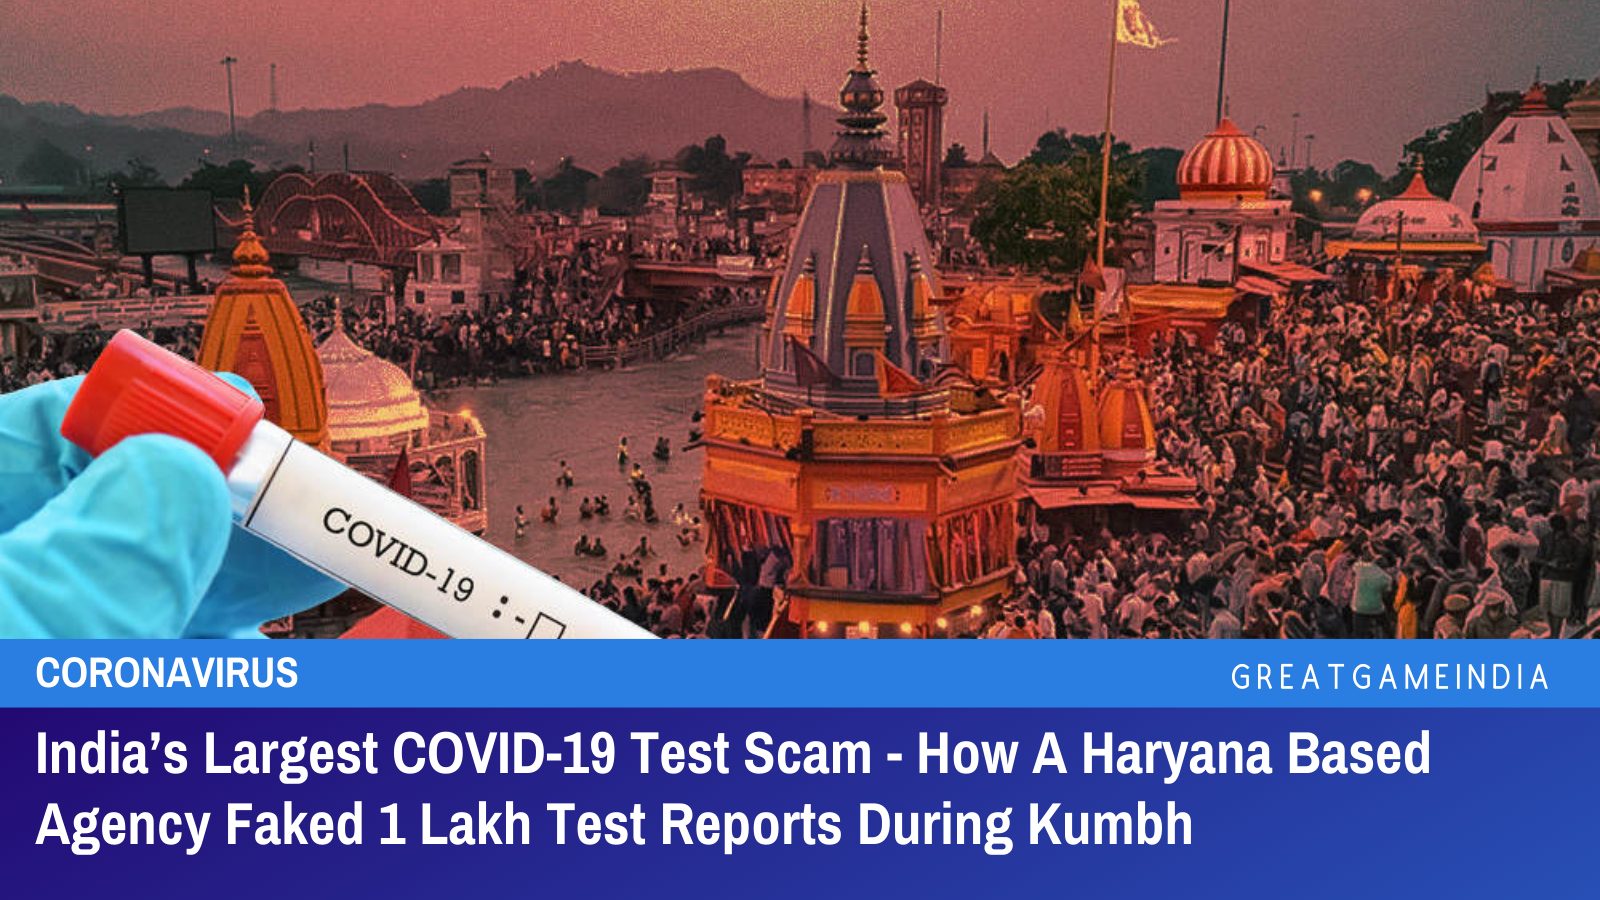 India’s Largest COVID-19 Test Scam - How A Haryana Based Agency Faked 1 Lakh Test Reports During Kumbh